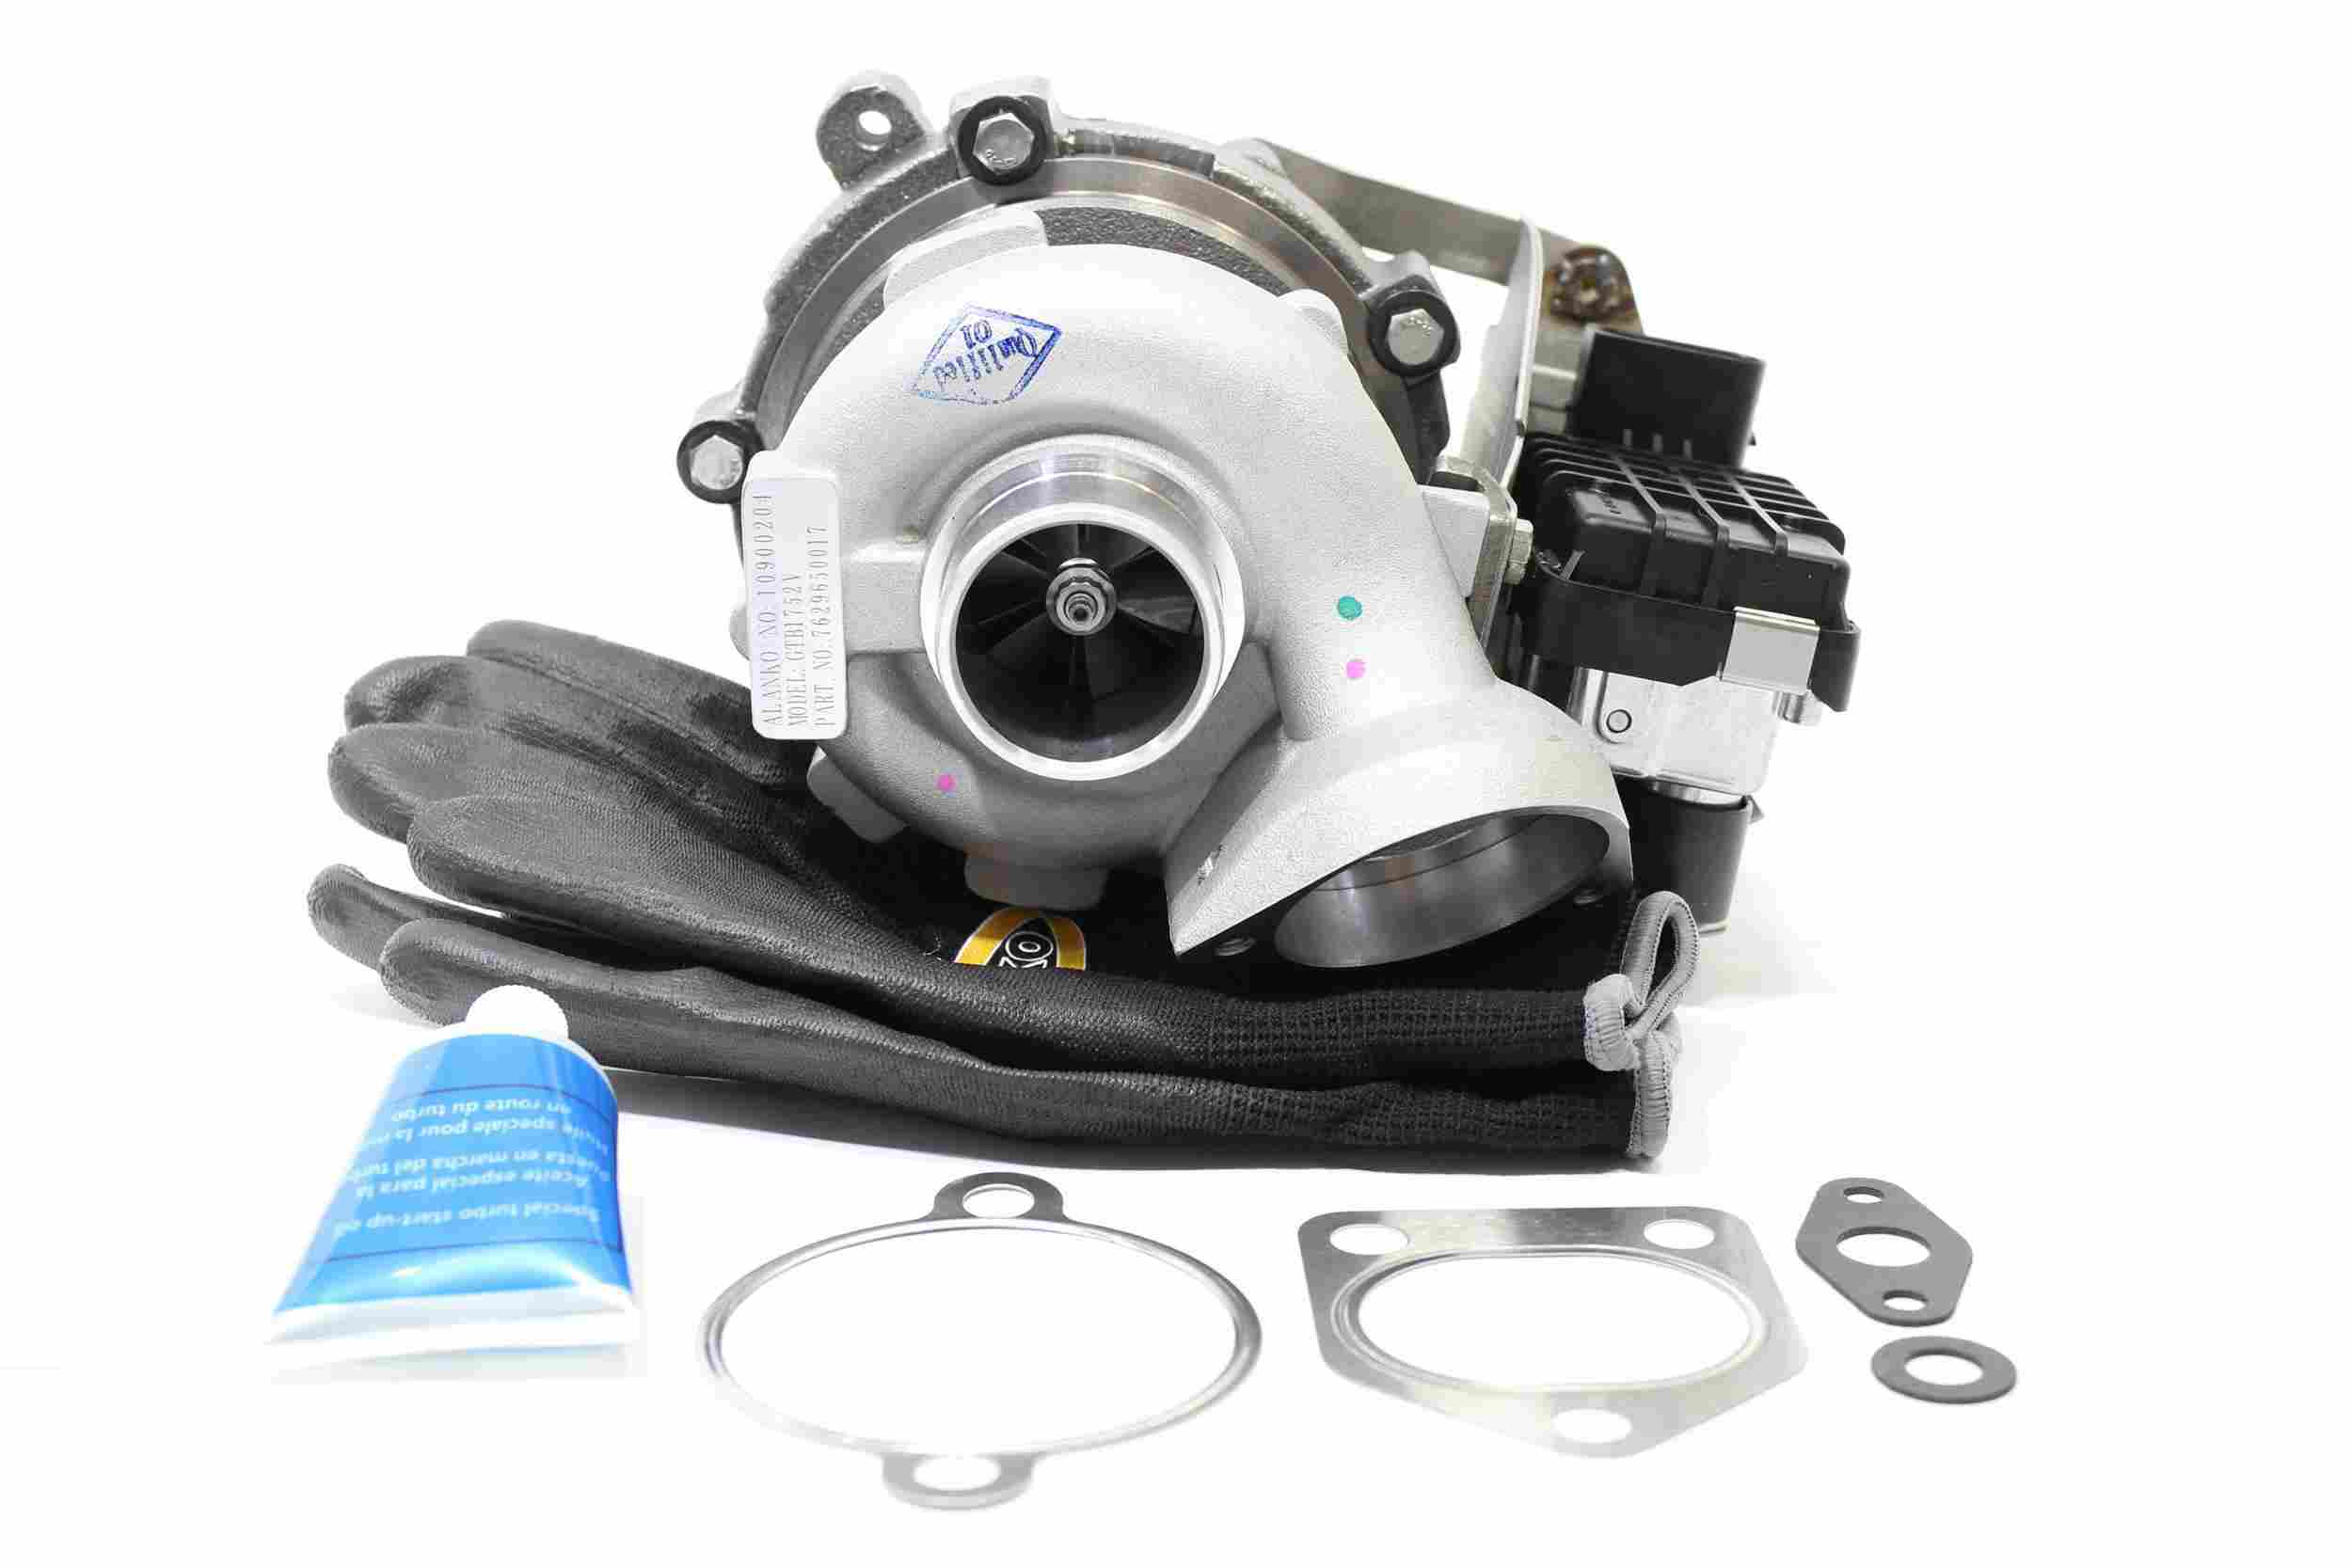 ALANKO 10900204 Turbocharger Exhaust Turbocharger, Incl. Gasket Set, with attachment material